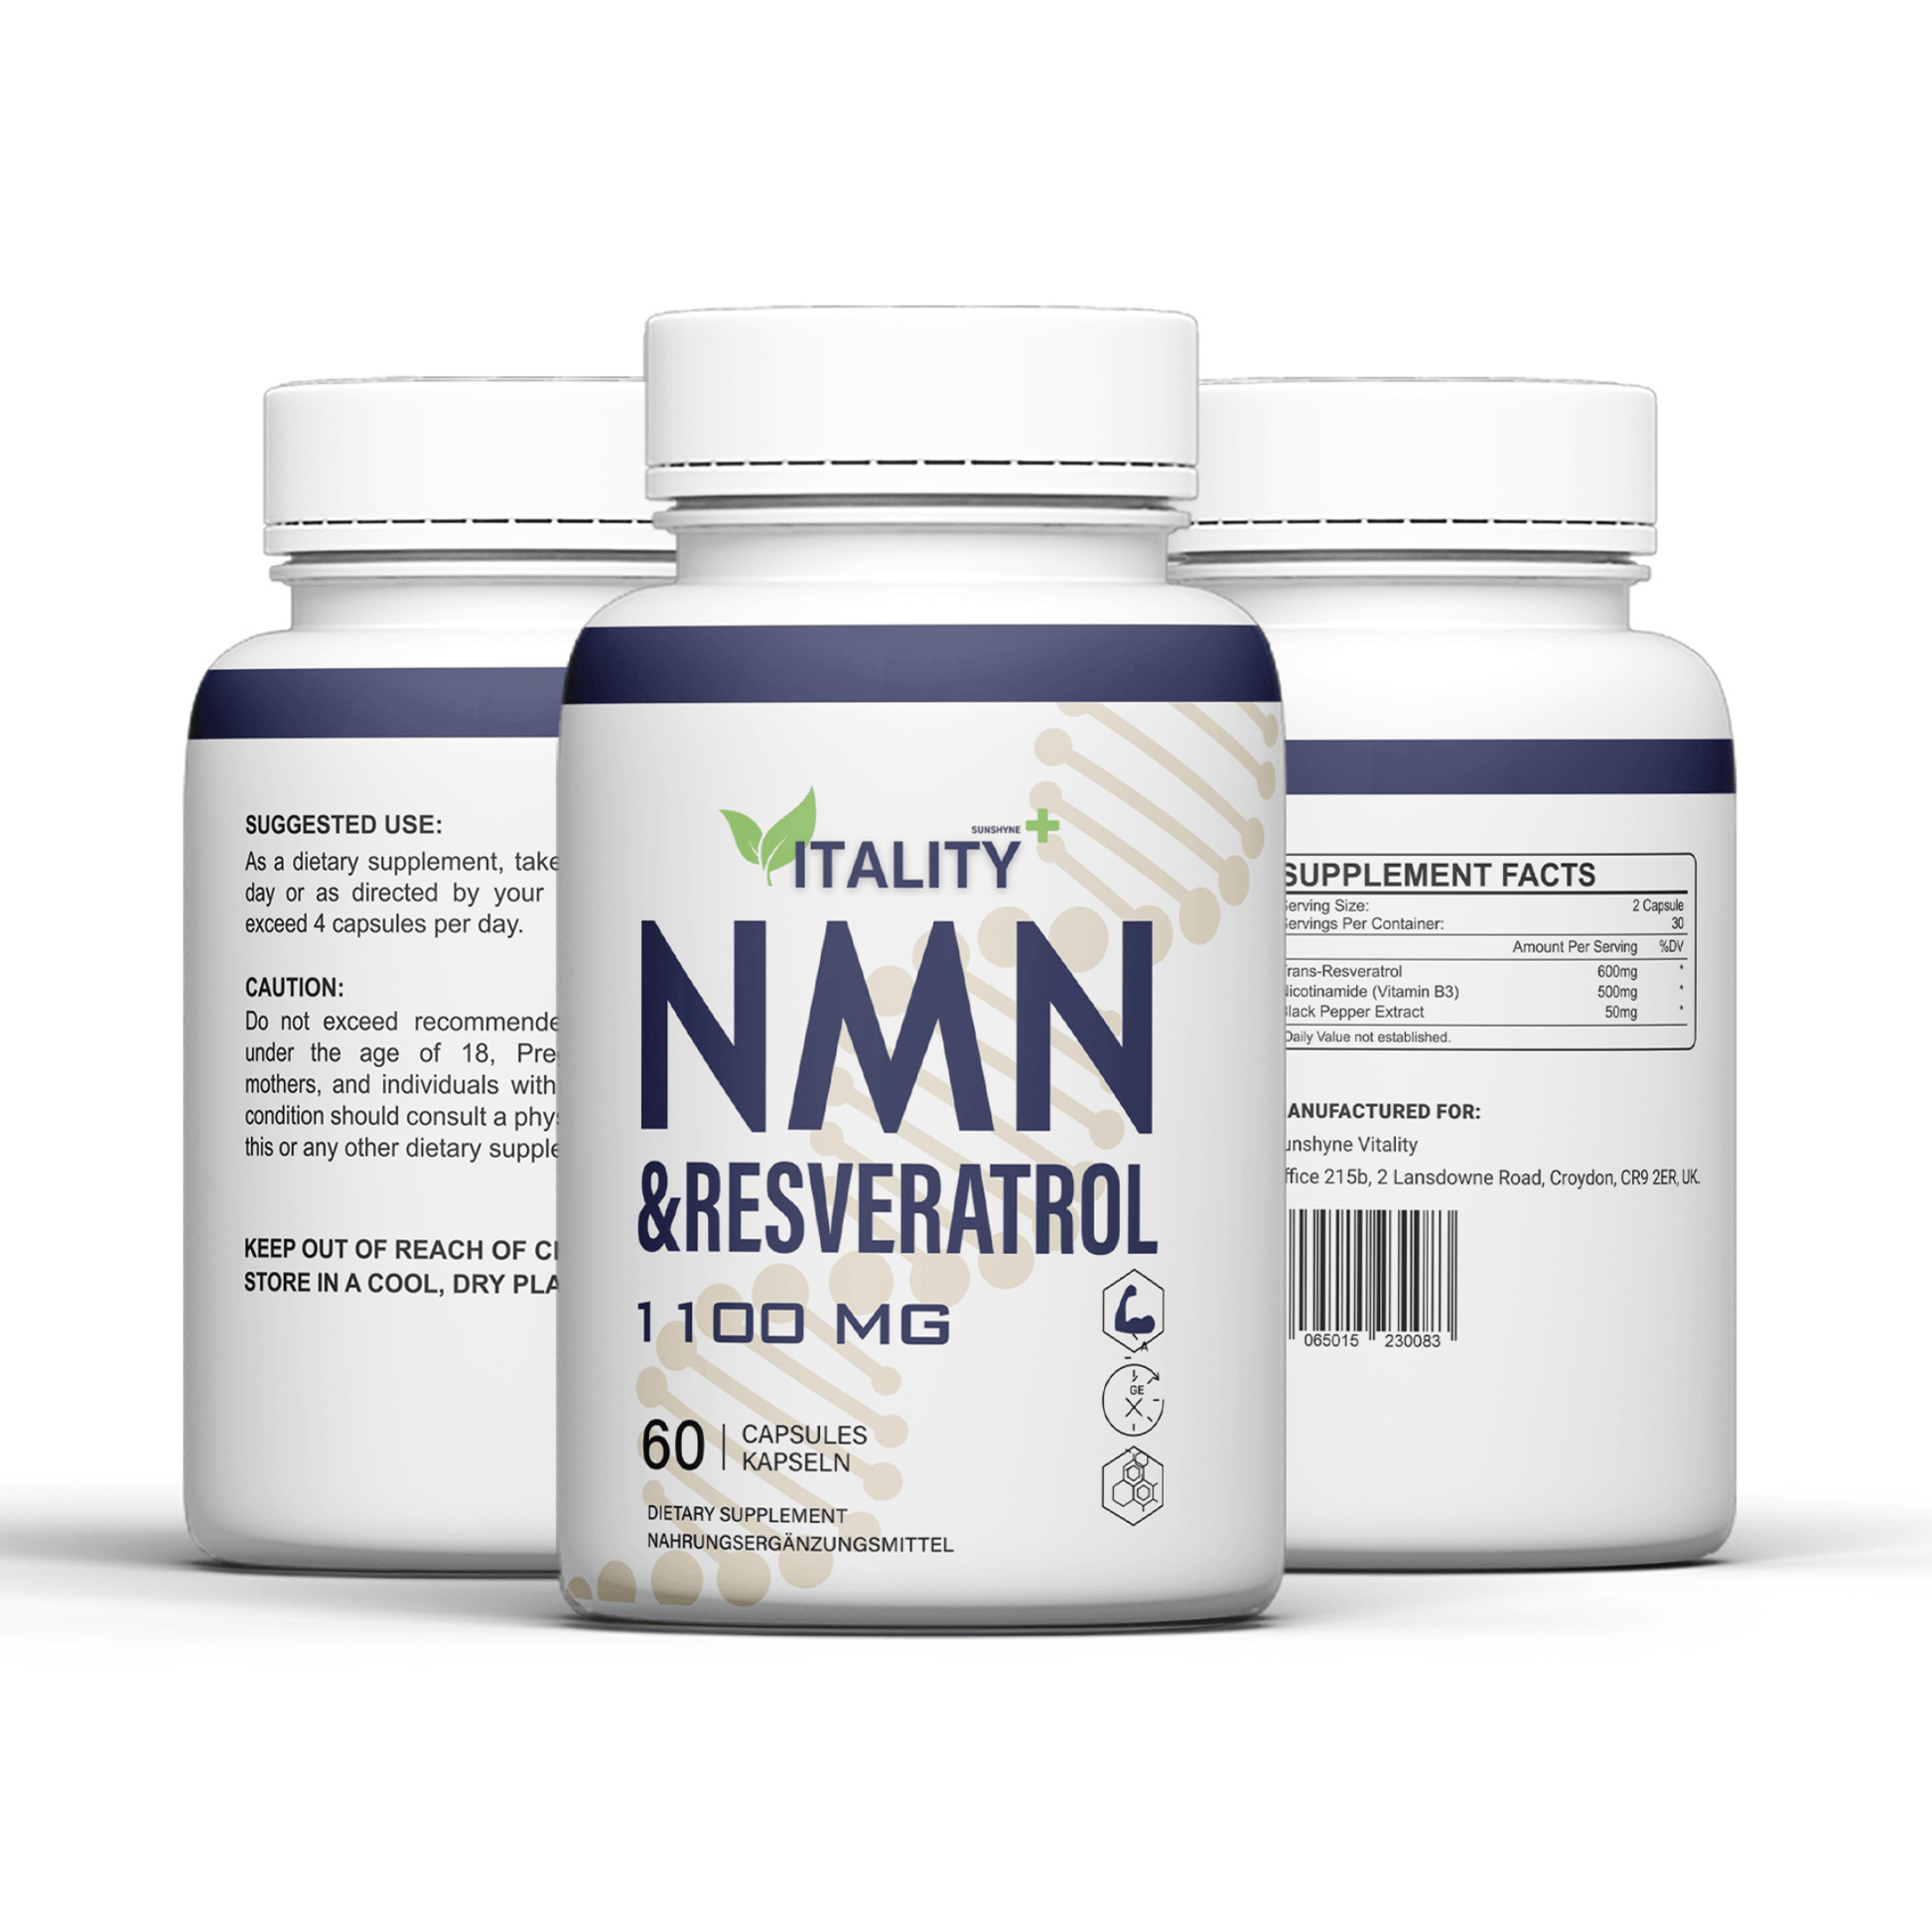 Clean supplement Advanced wellness formula Synergistic health support Energy metabolism Free radicals defense